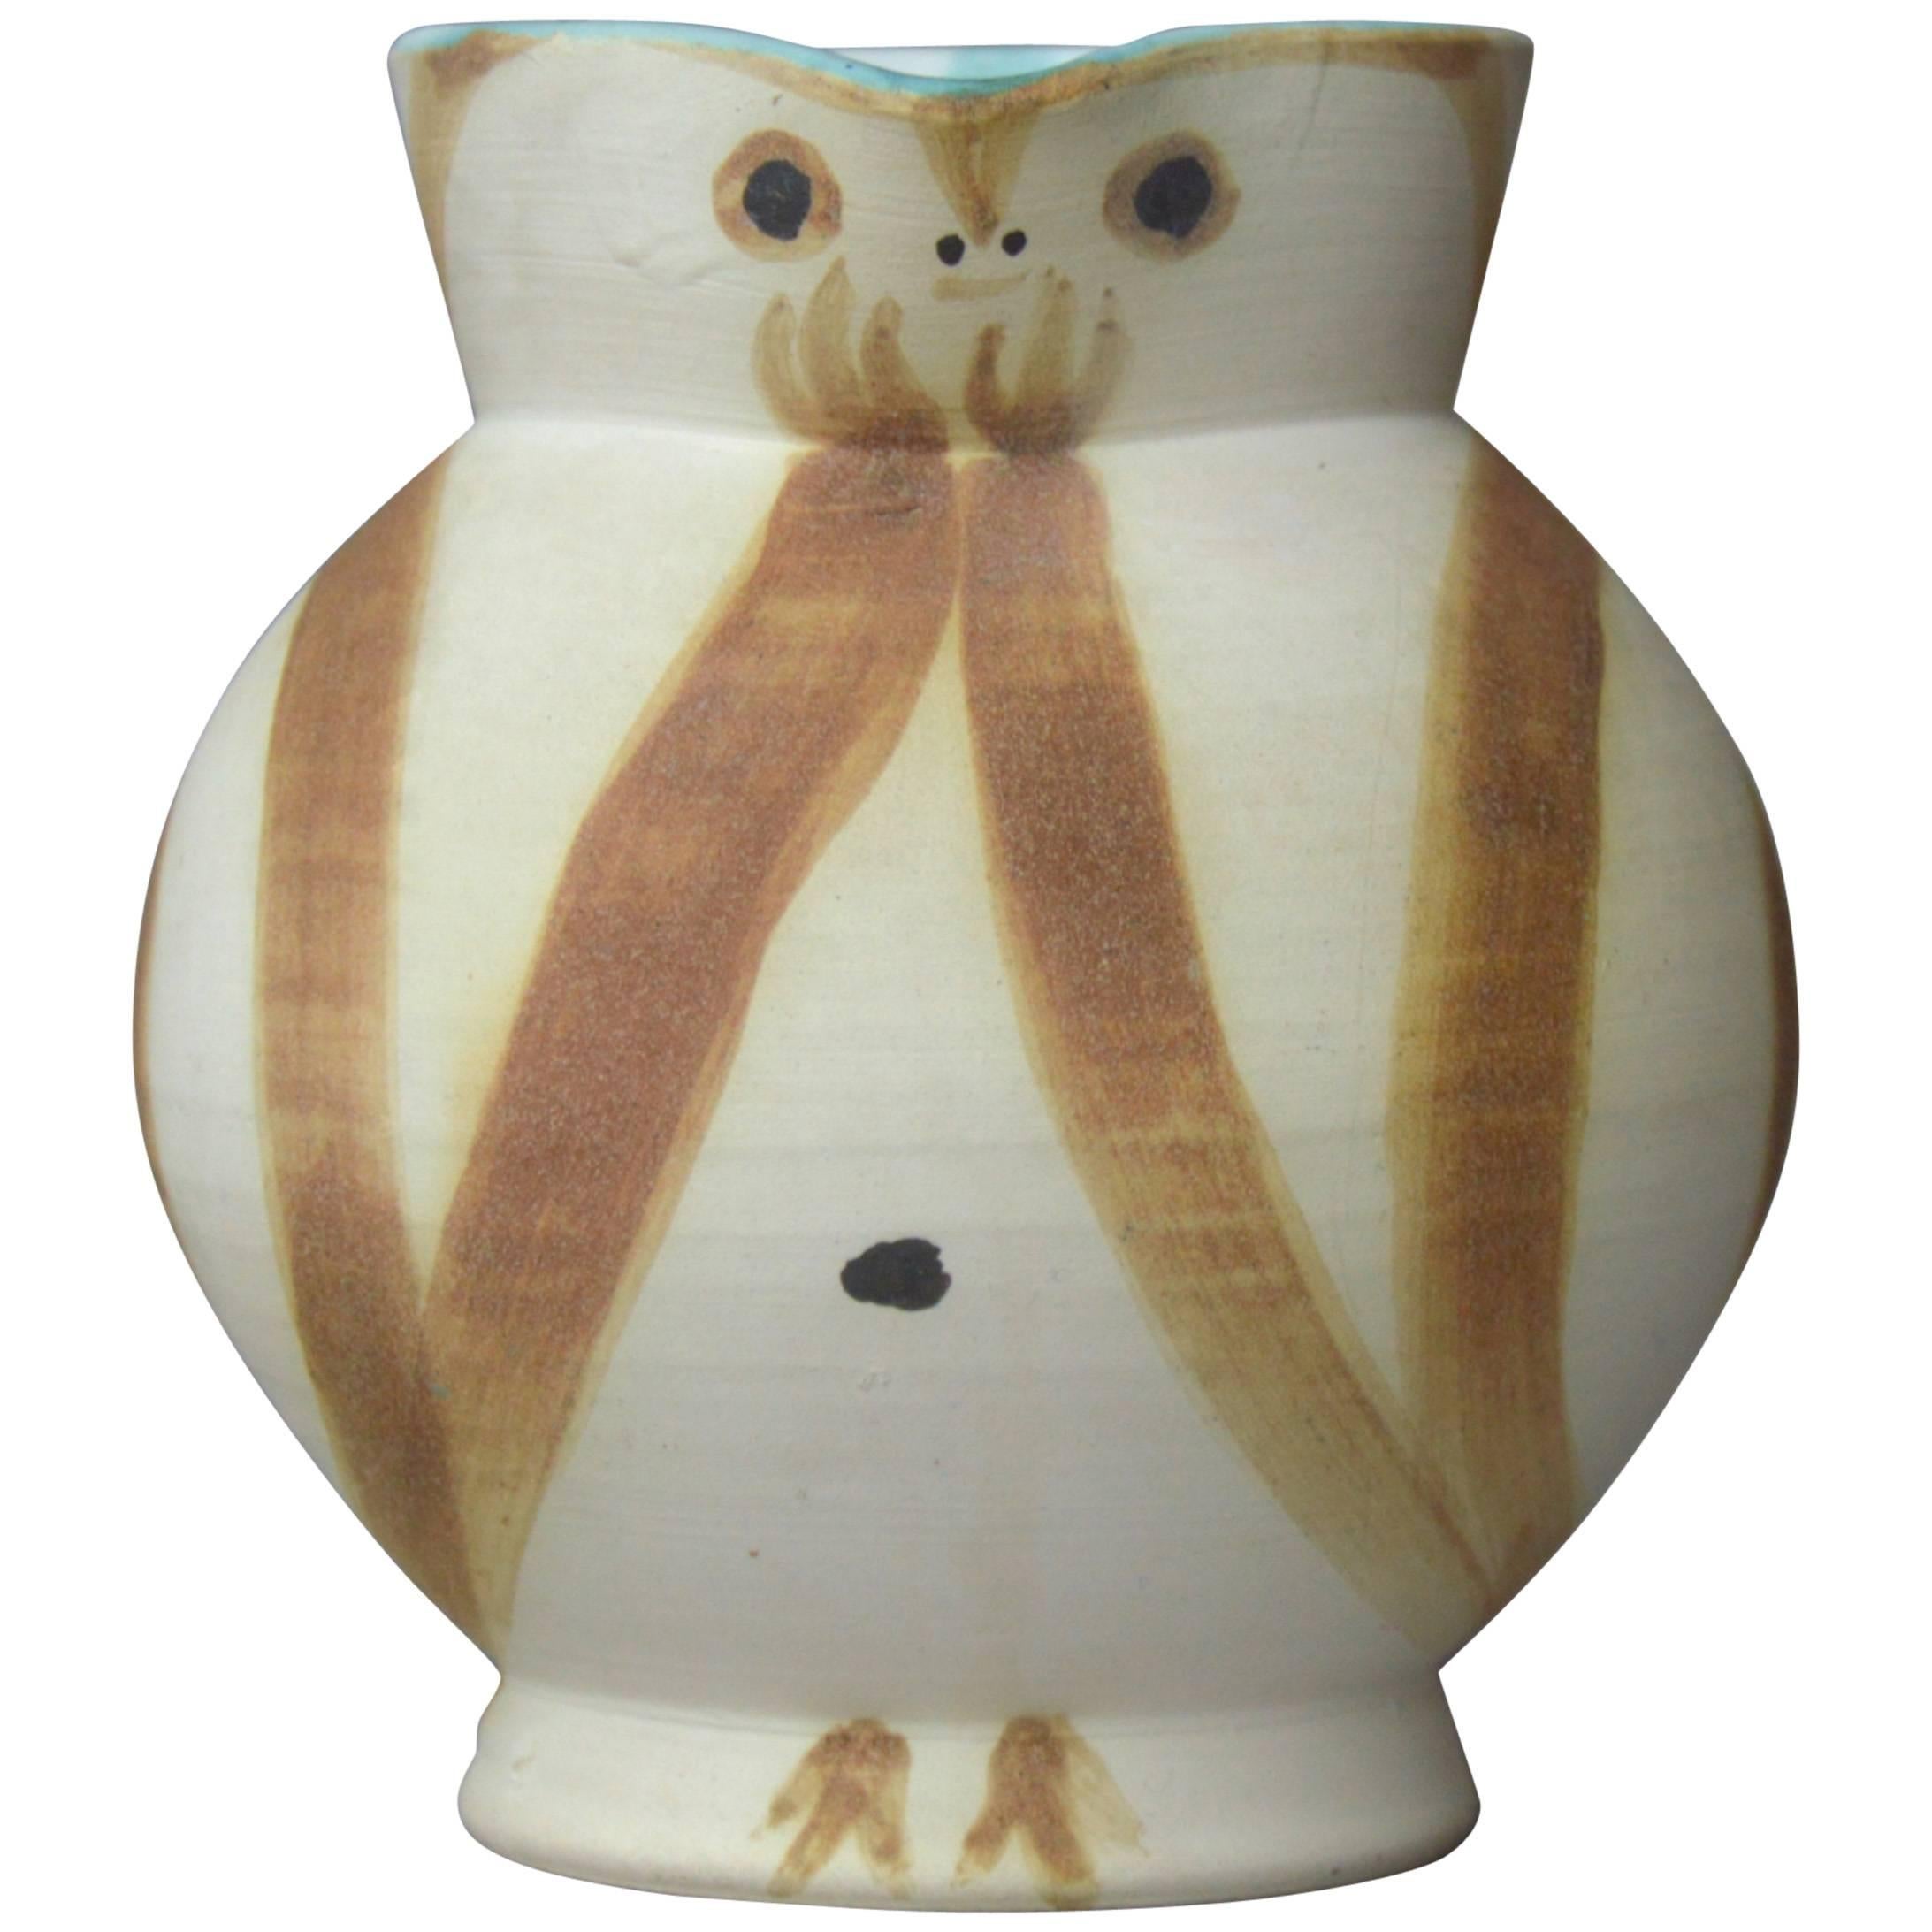 Pablo Picasso Madoura Ceramic Pitcher Little Wood-Owl, 1949